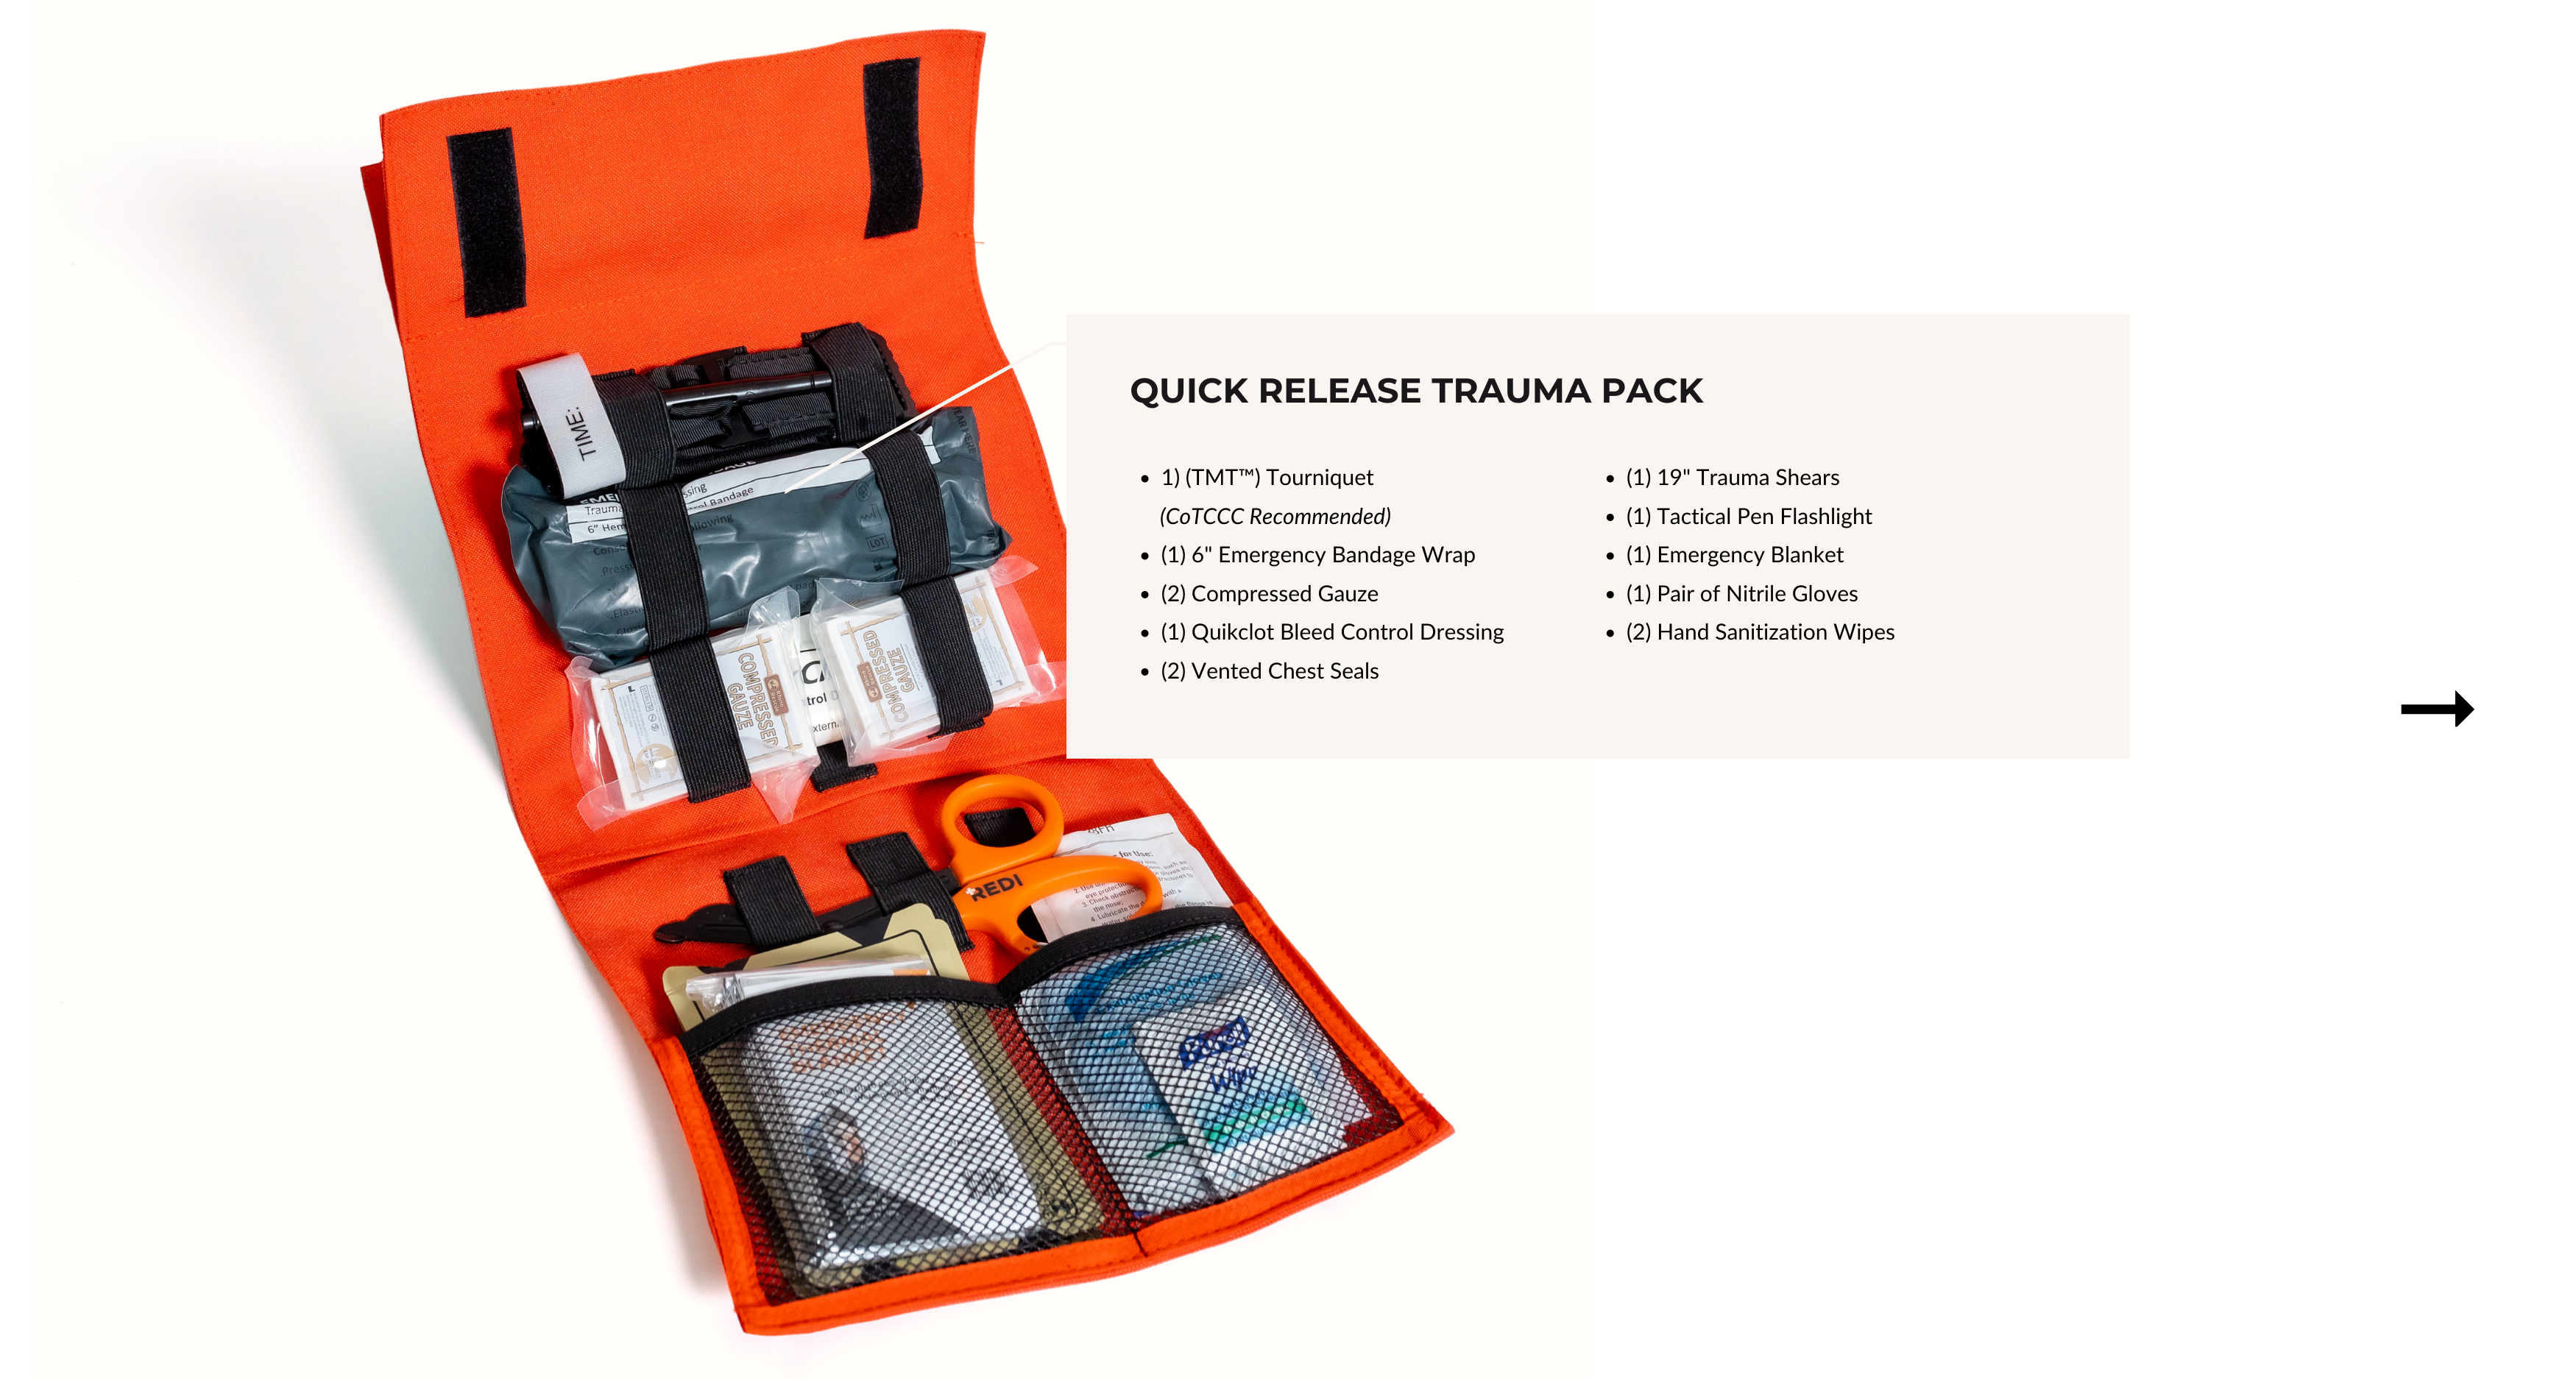 Contents inside the quick release trauma pack, which includes a list of blood hemorrhaging supplies used to treat critical, life threatening wounds 